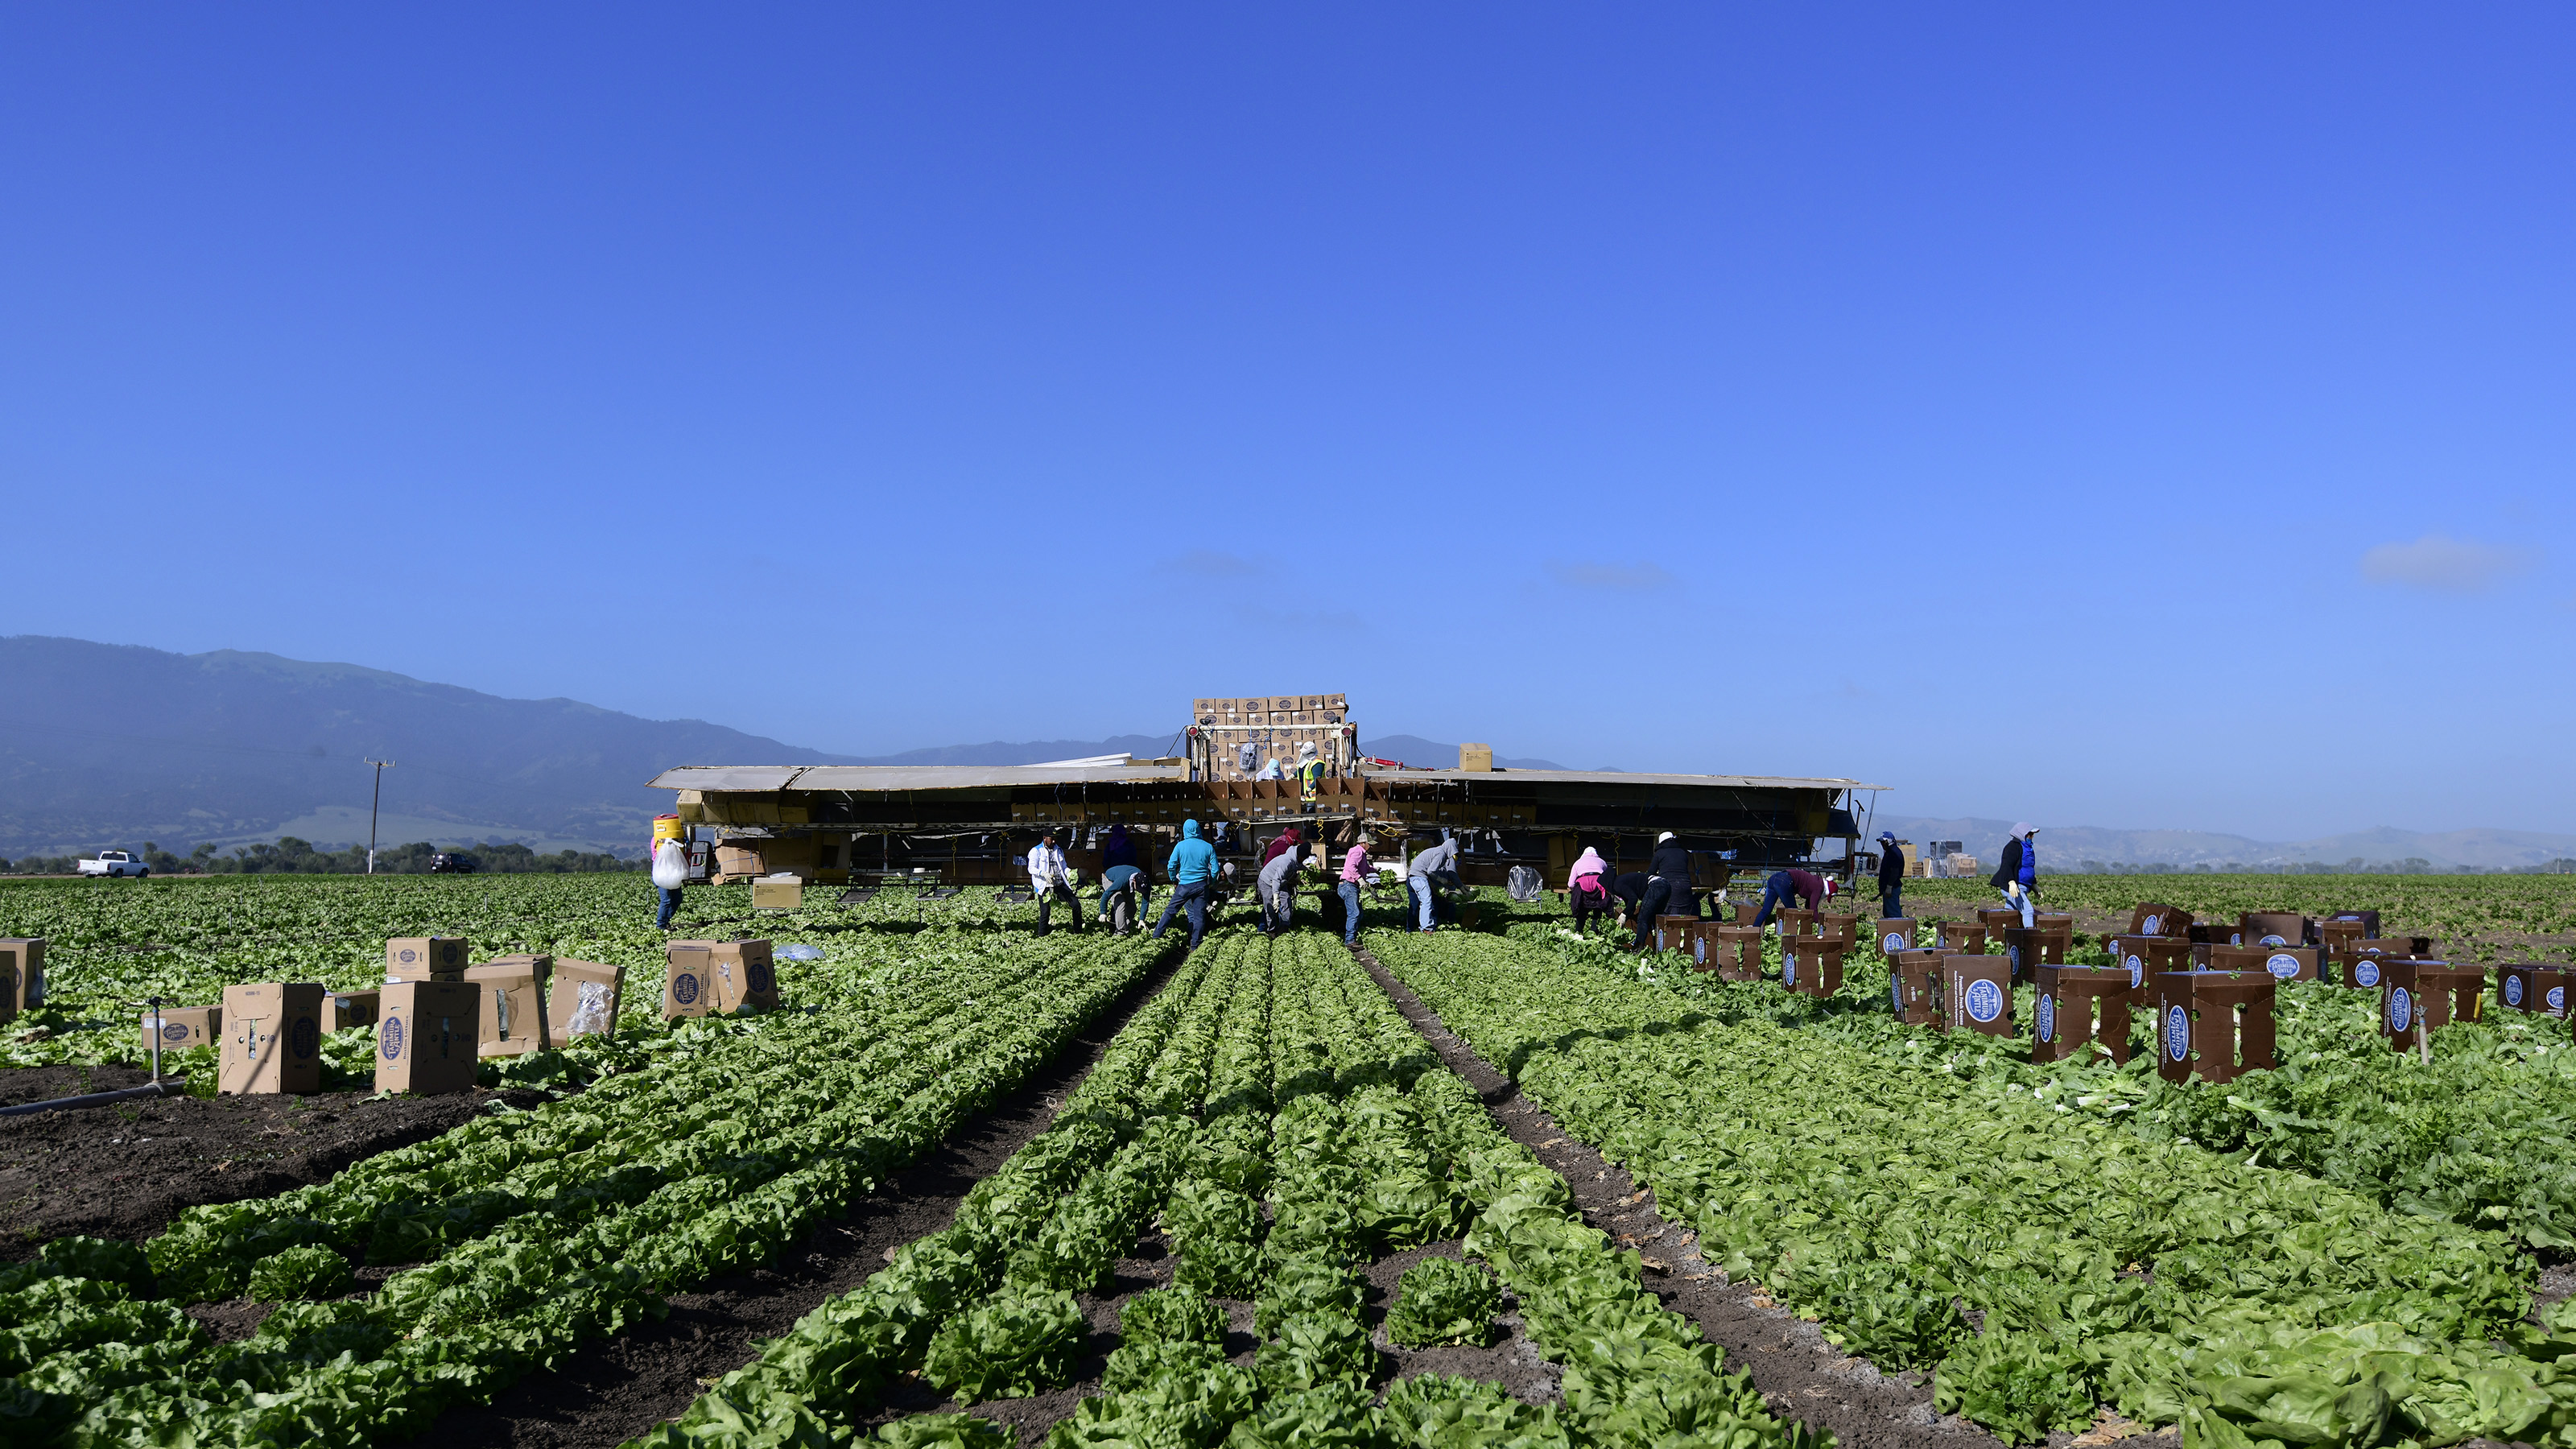 Farmers and field workers tend a crop of lettuce in the fertile Salinas Valley, known as the 'salad bowl' of the U.S. for its high-quality produce. Photo by David Tulis.